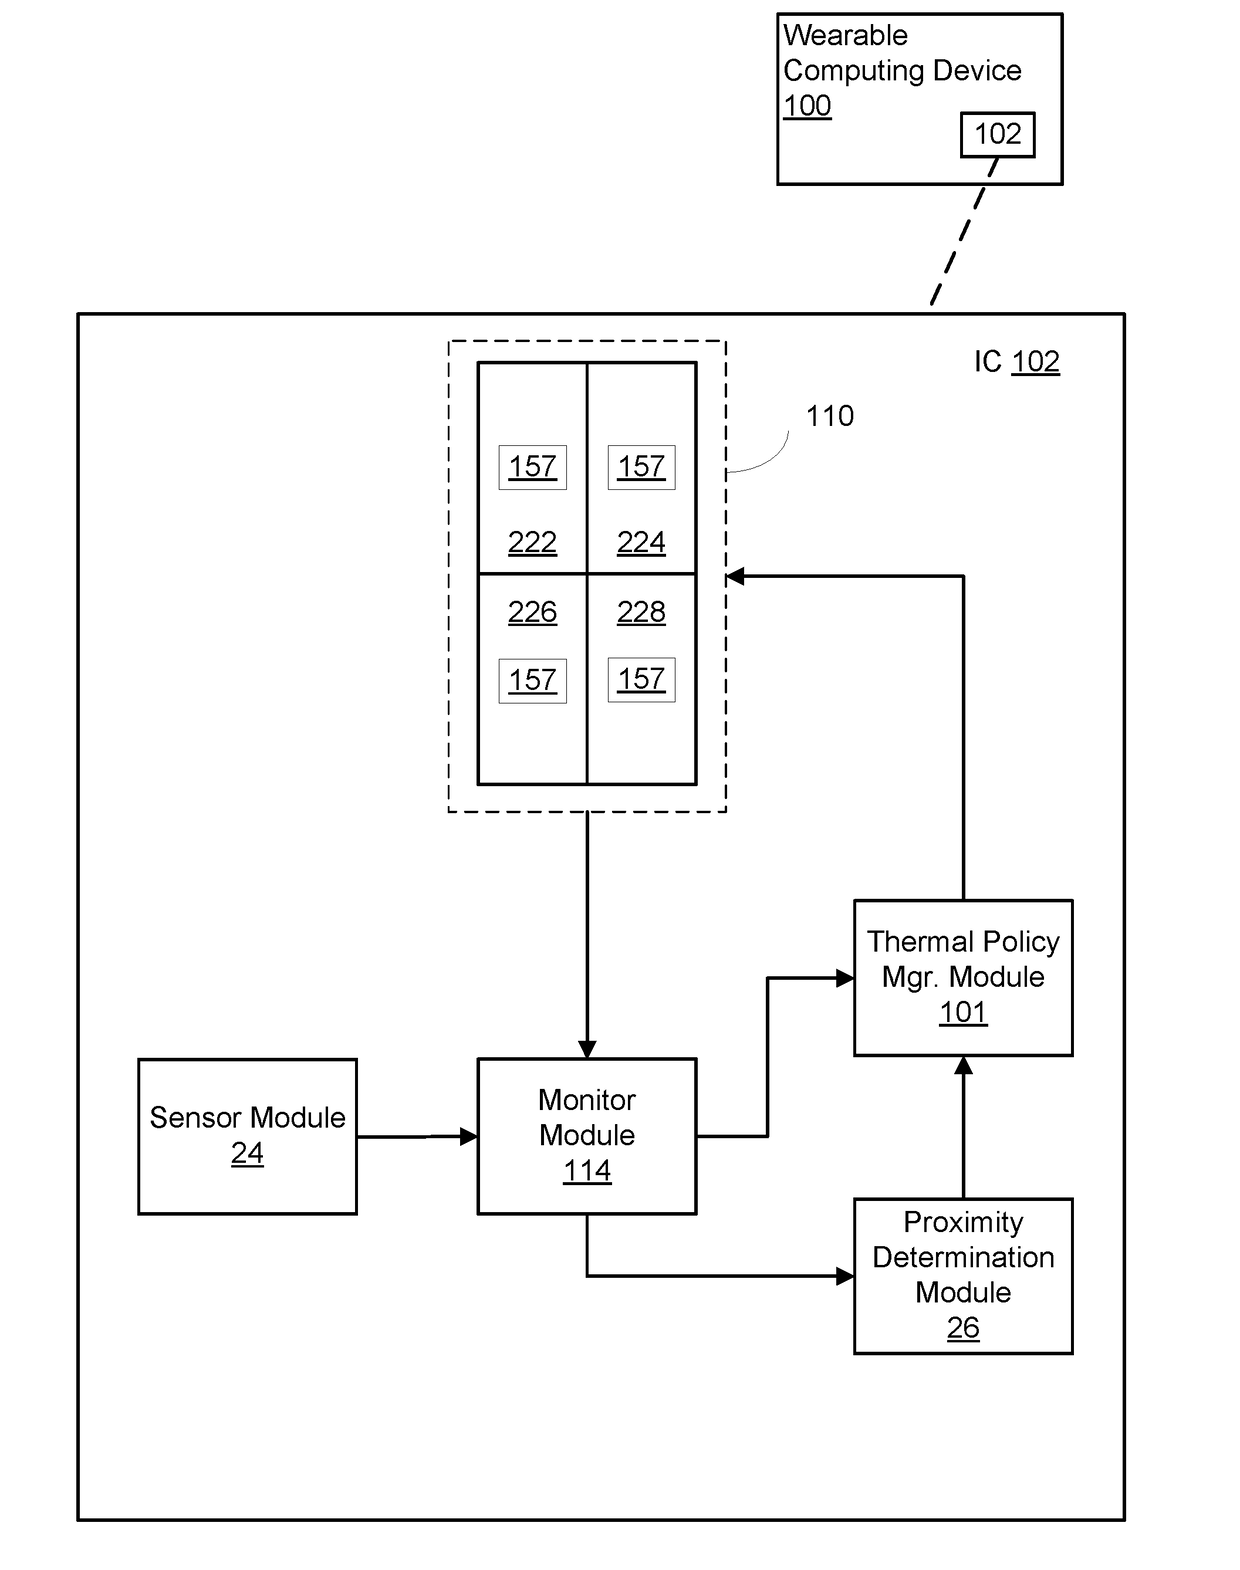 System and method for thermal management of a wearable computing device based on proximity to a user